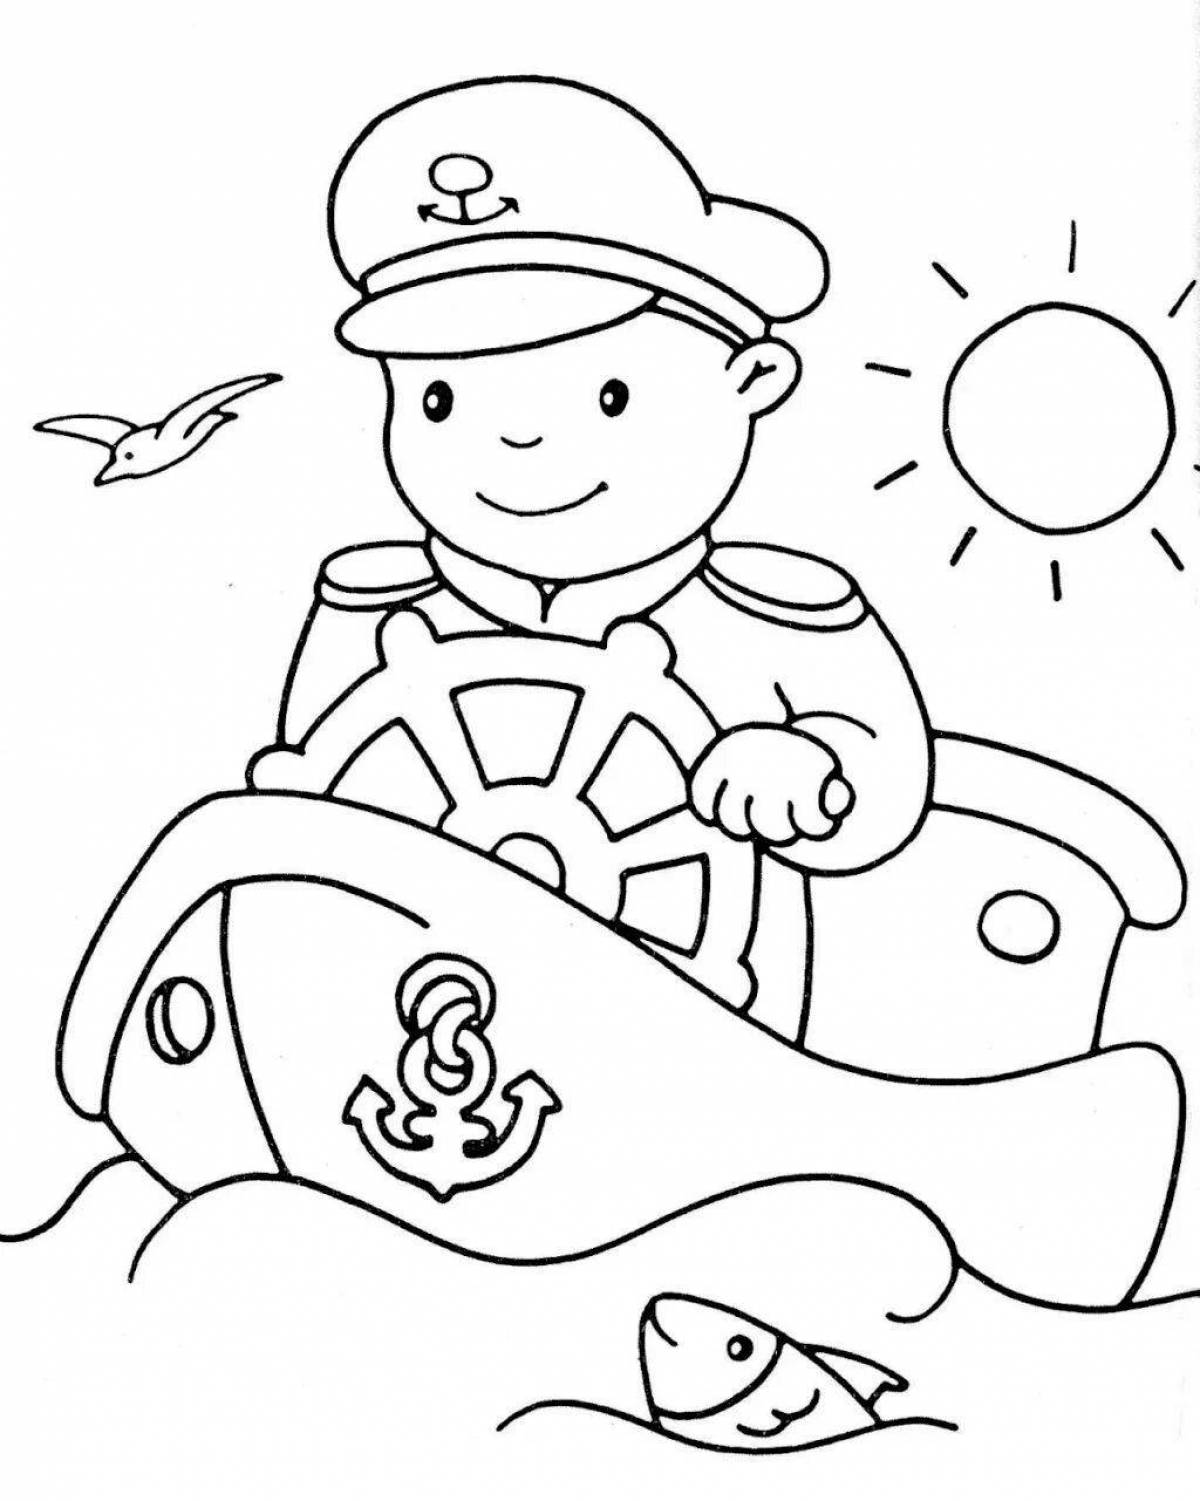 February 23 coloring book for babies